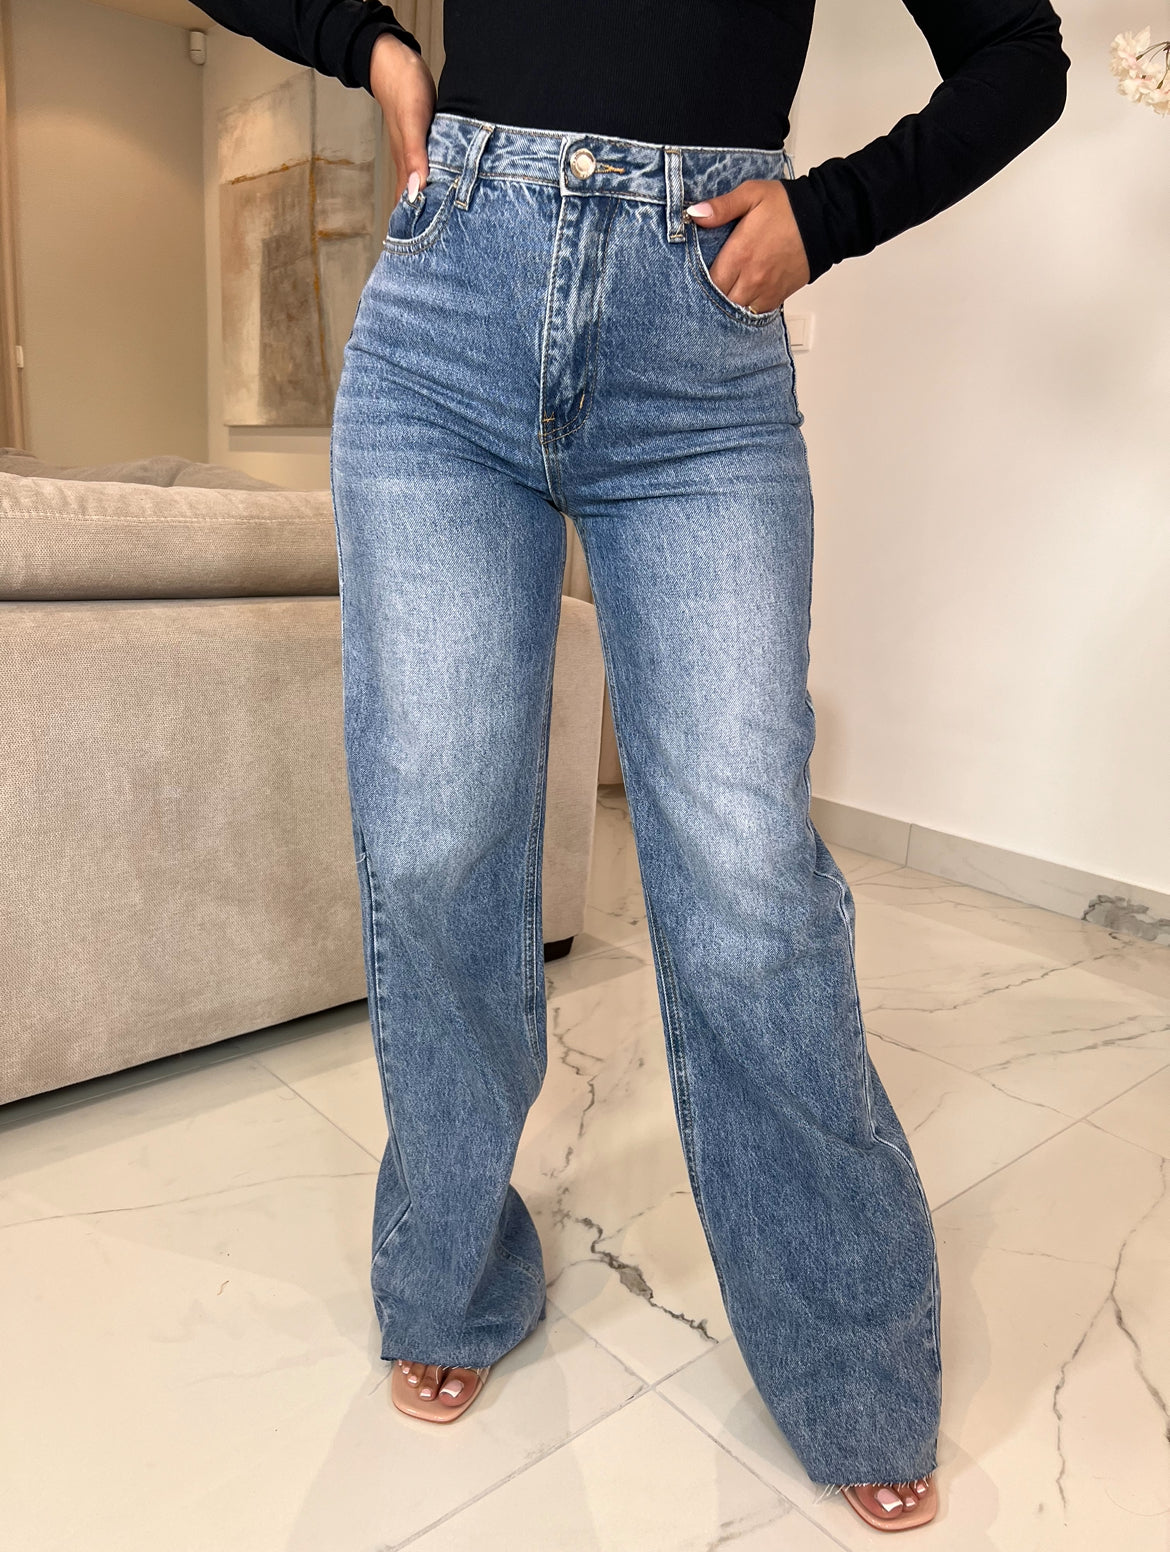 Jeans New02